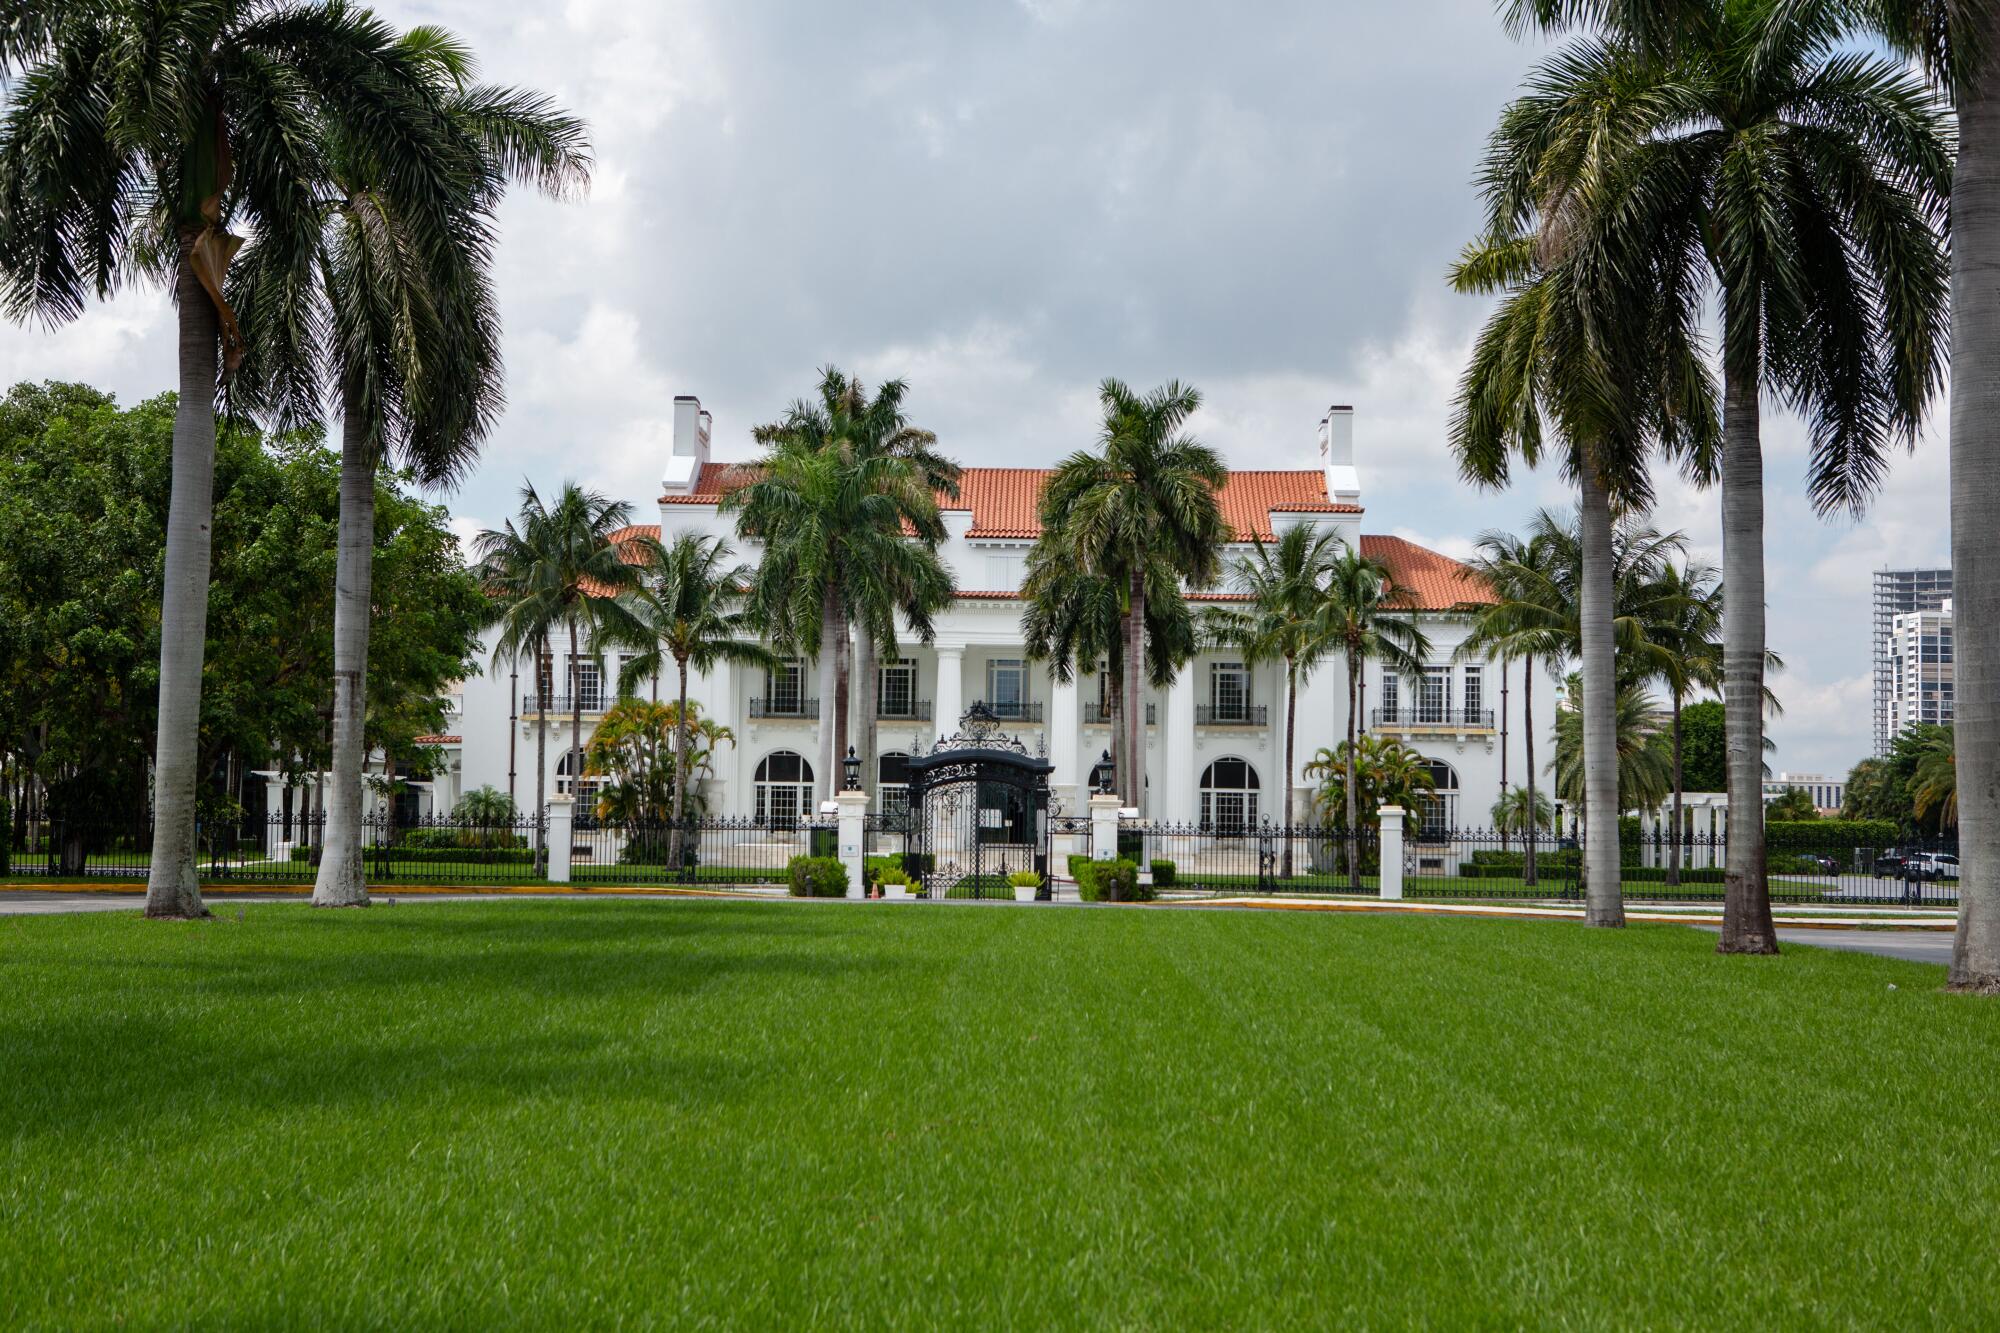 A white mansion known with a large green lawn and palm trees